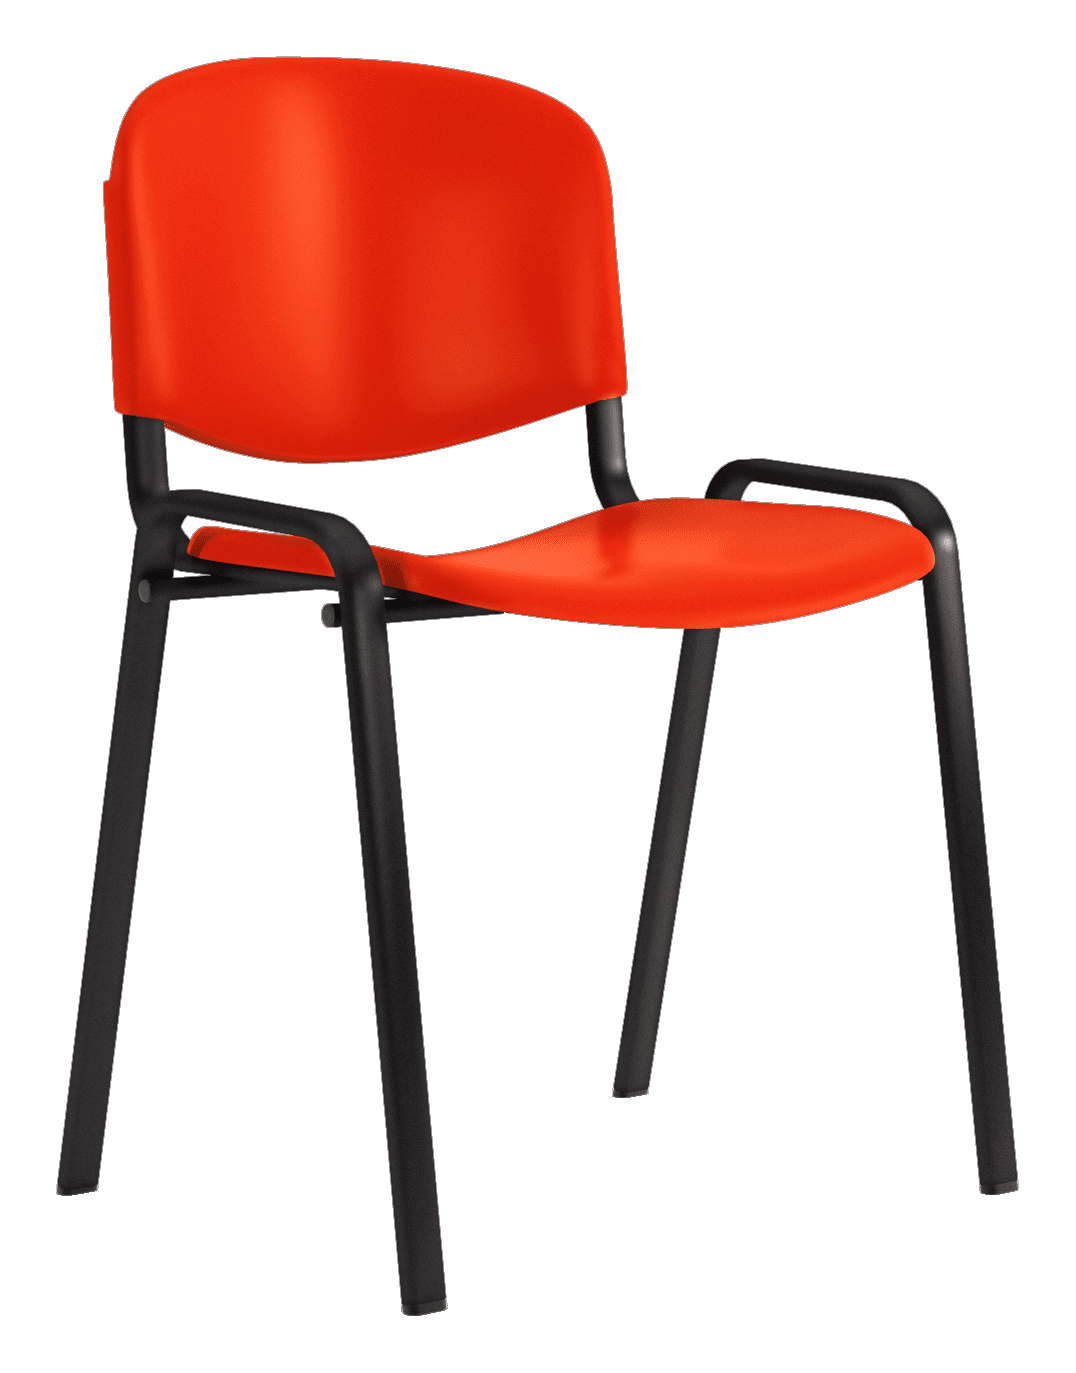 Conference / Training Chair - Red Topper